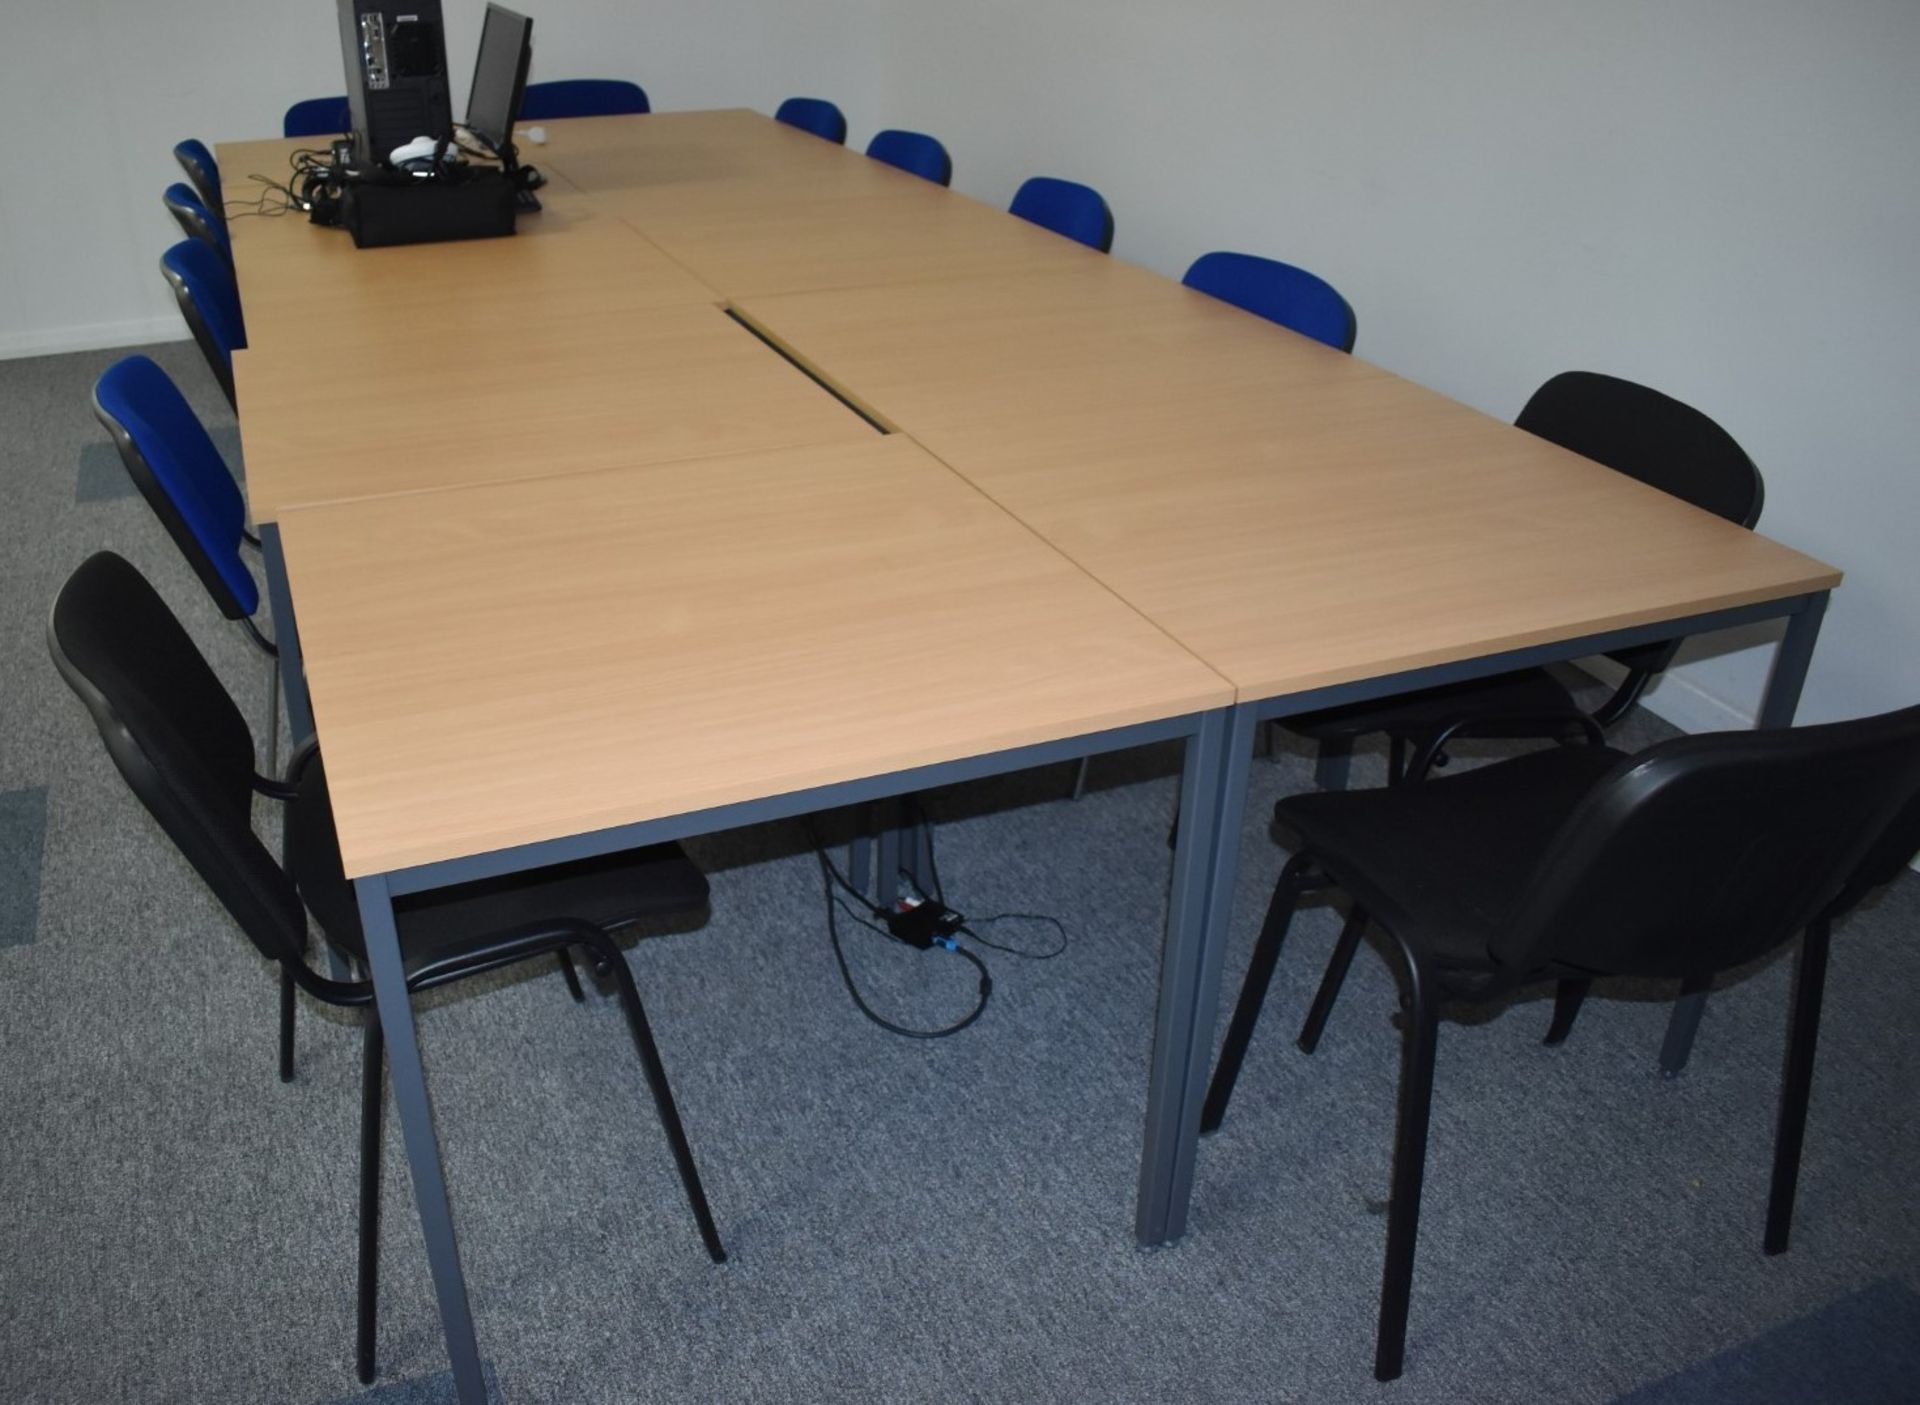 7 x Matching Office Tables With Beech Tops and Dark Grey Bases - CL490 - Location: Putney, London, - Image 2 of 4